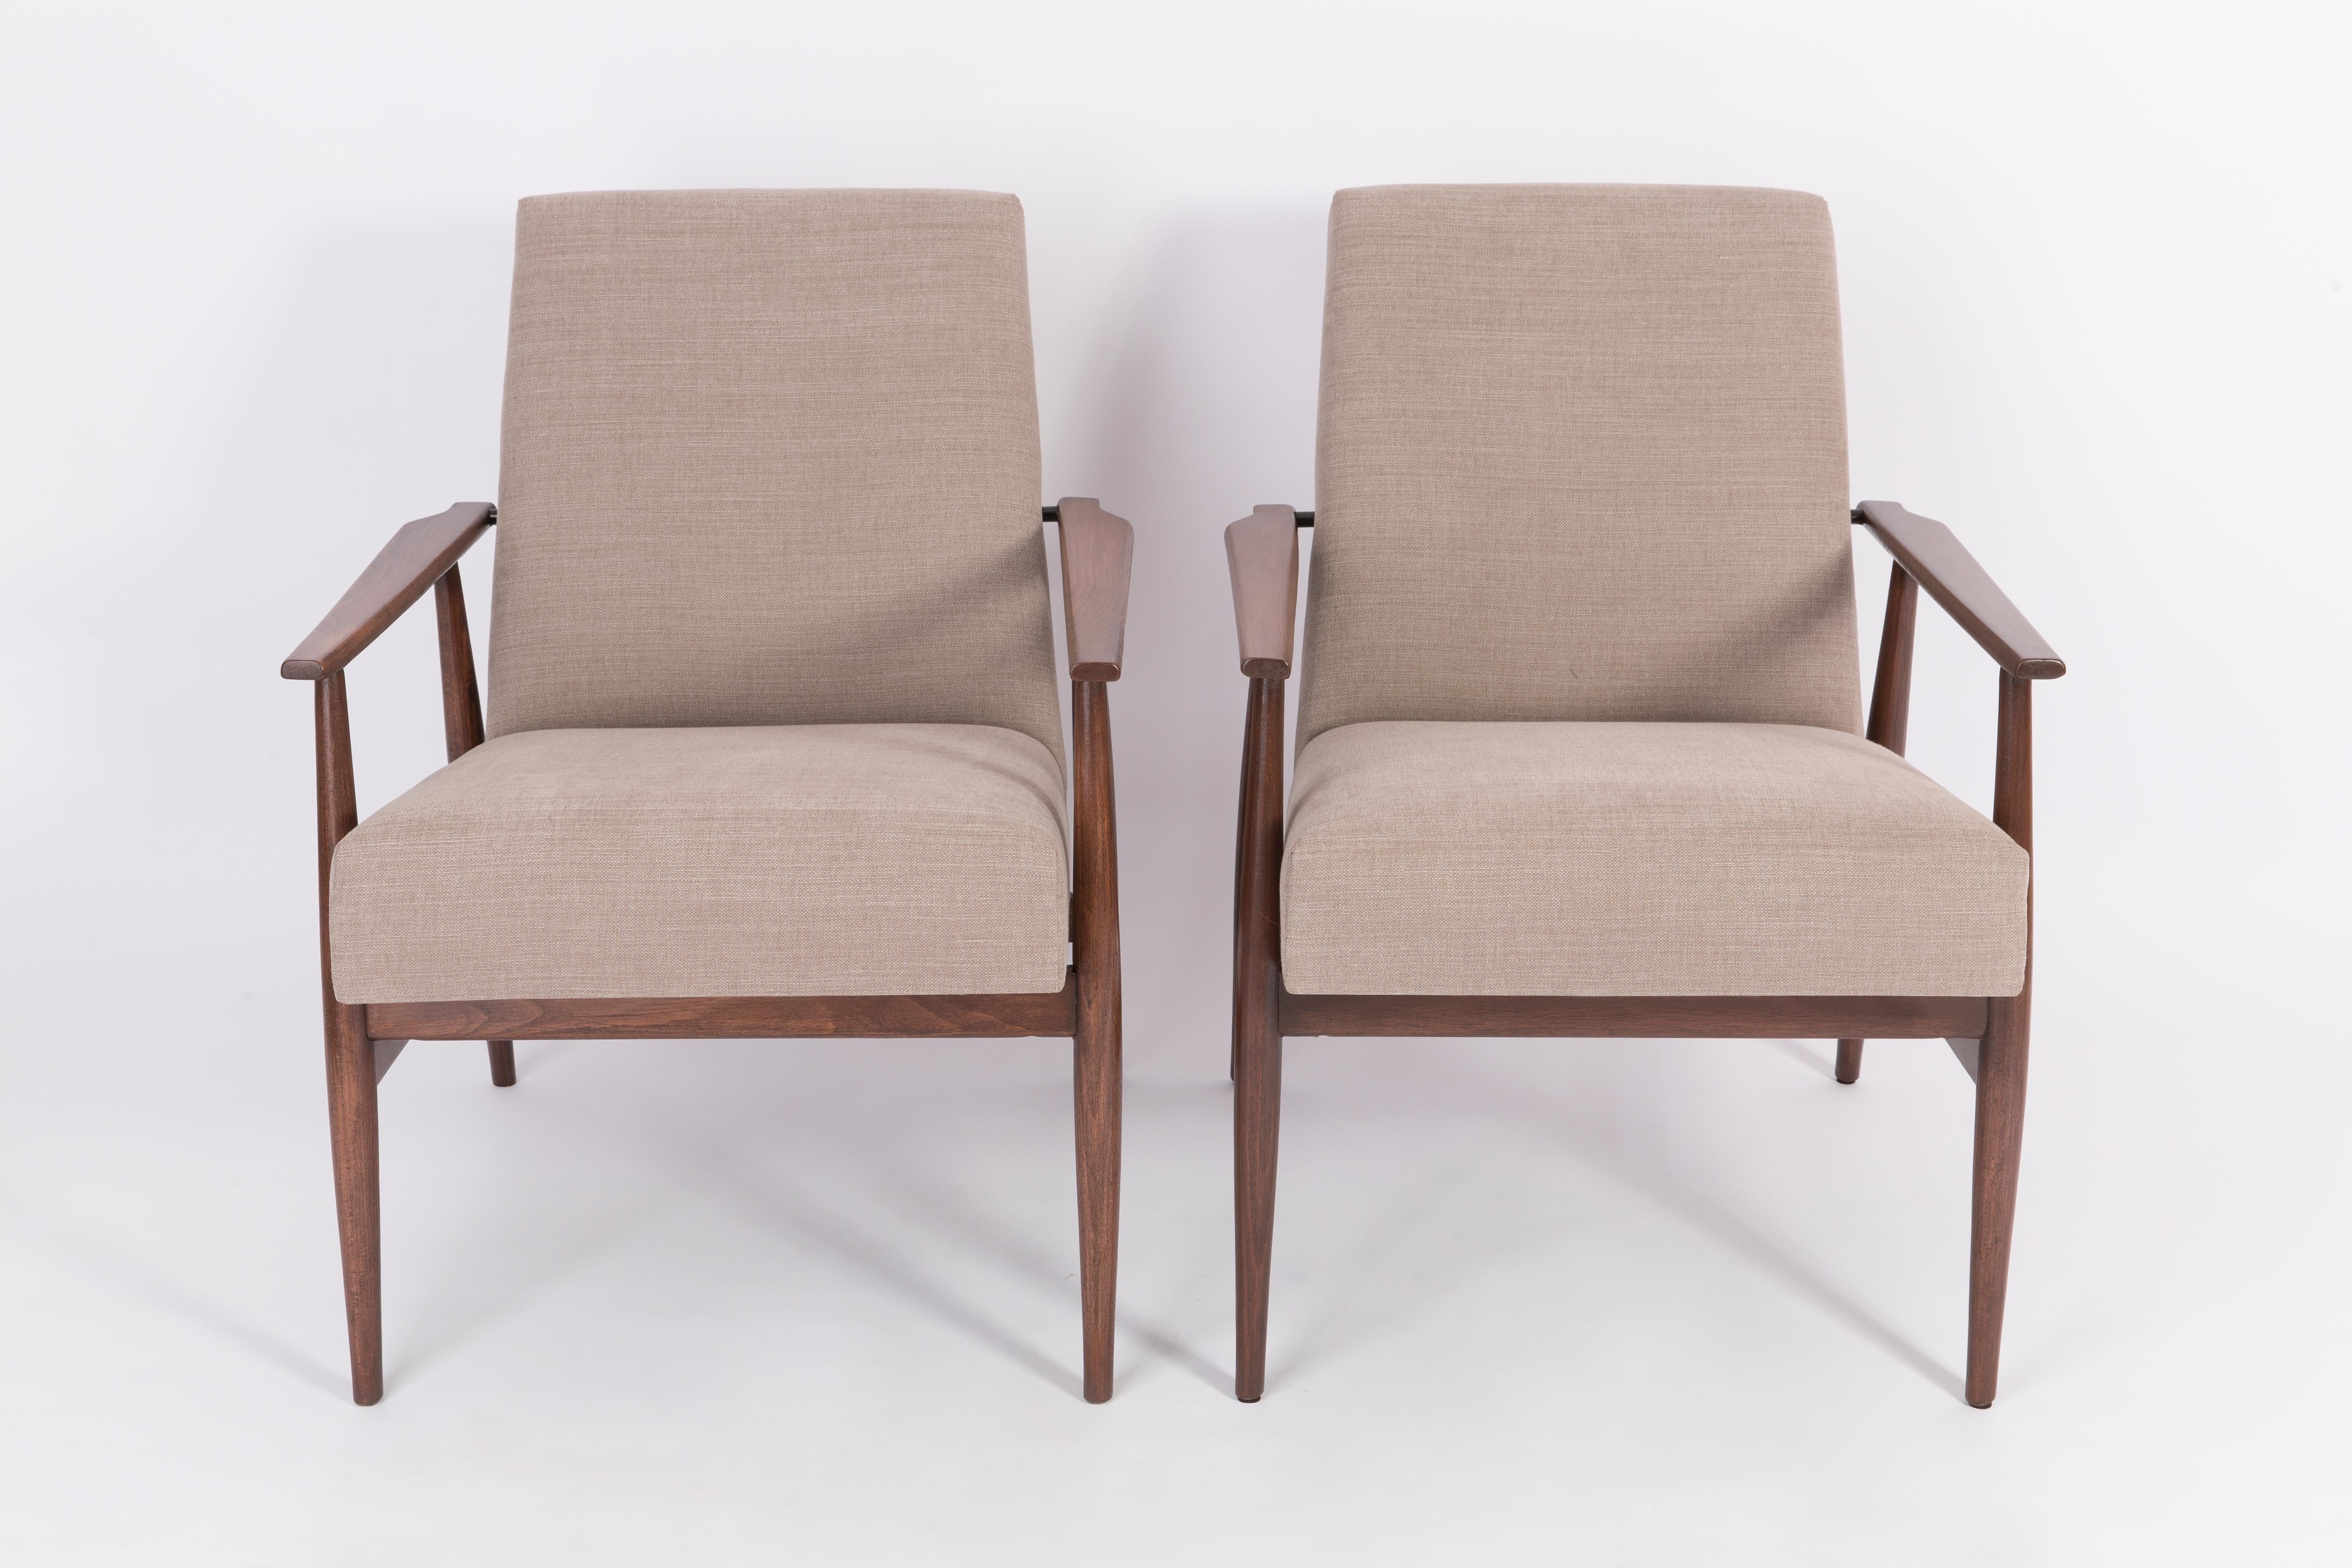 Polish Set of Two 20th Century Beige Dante Armchairs, H. Lis, 1960s For Sale